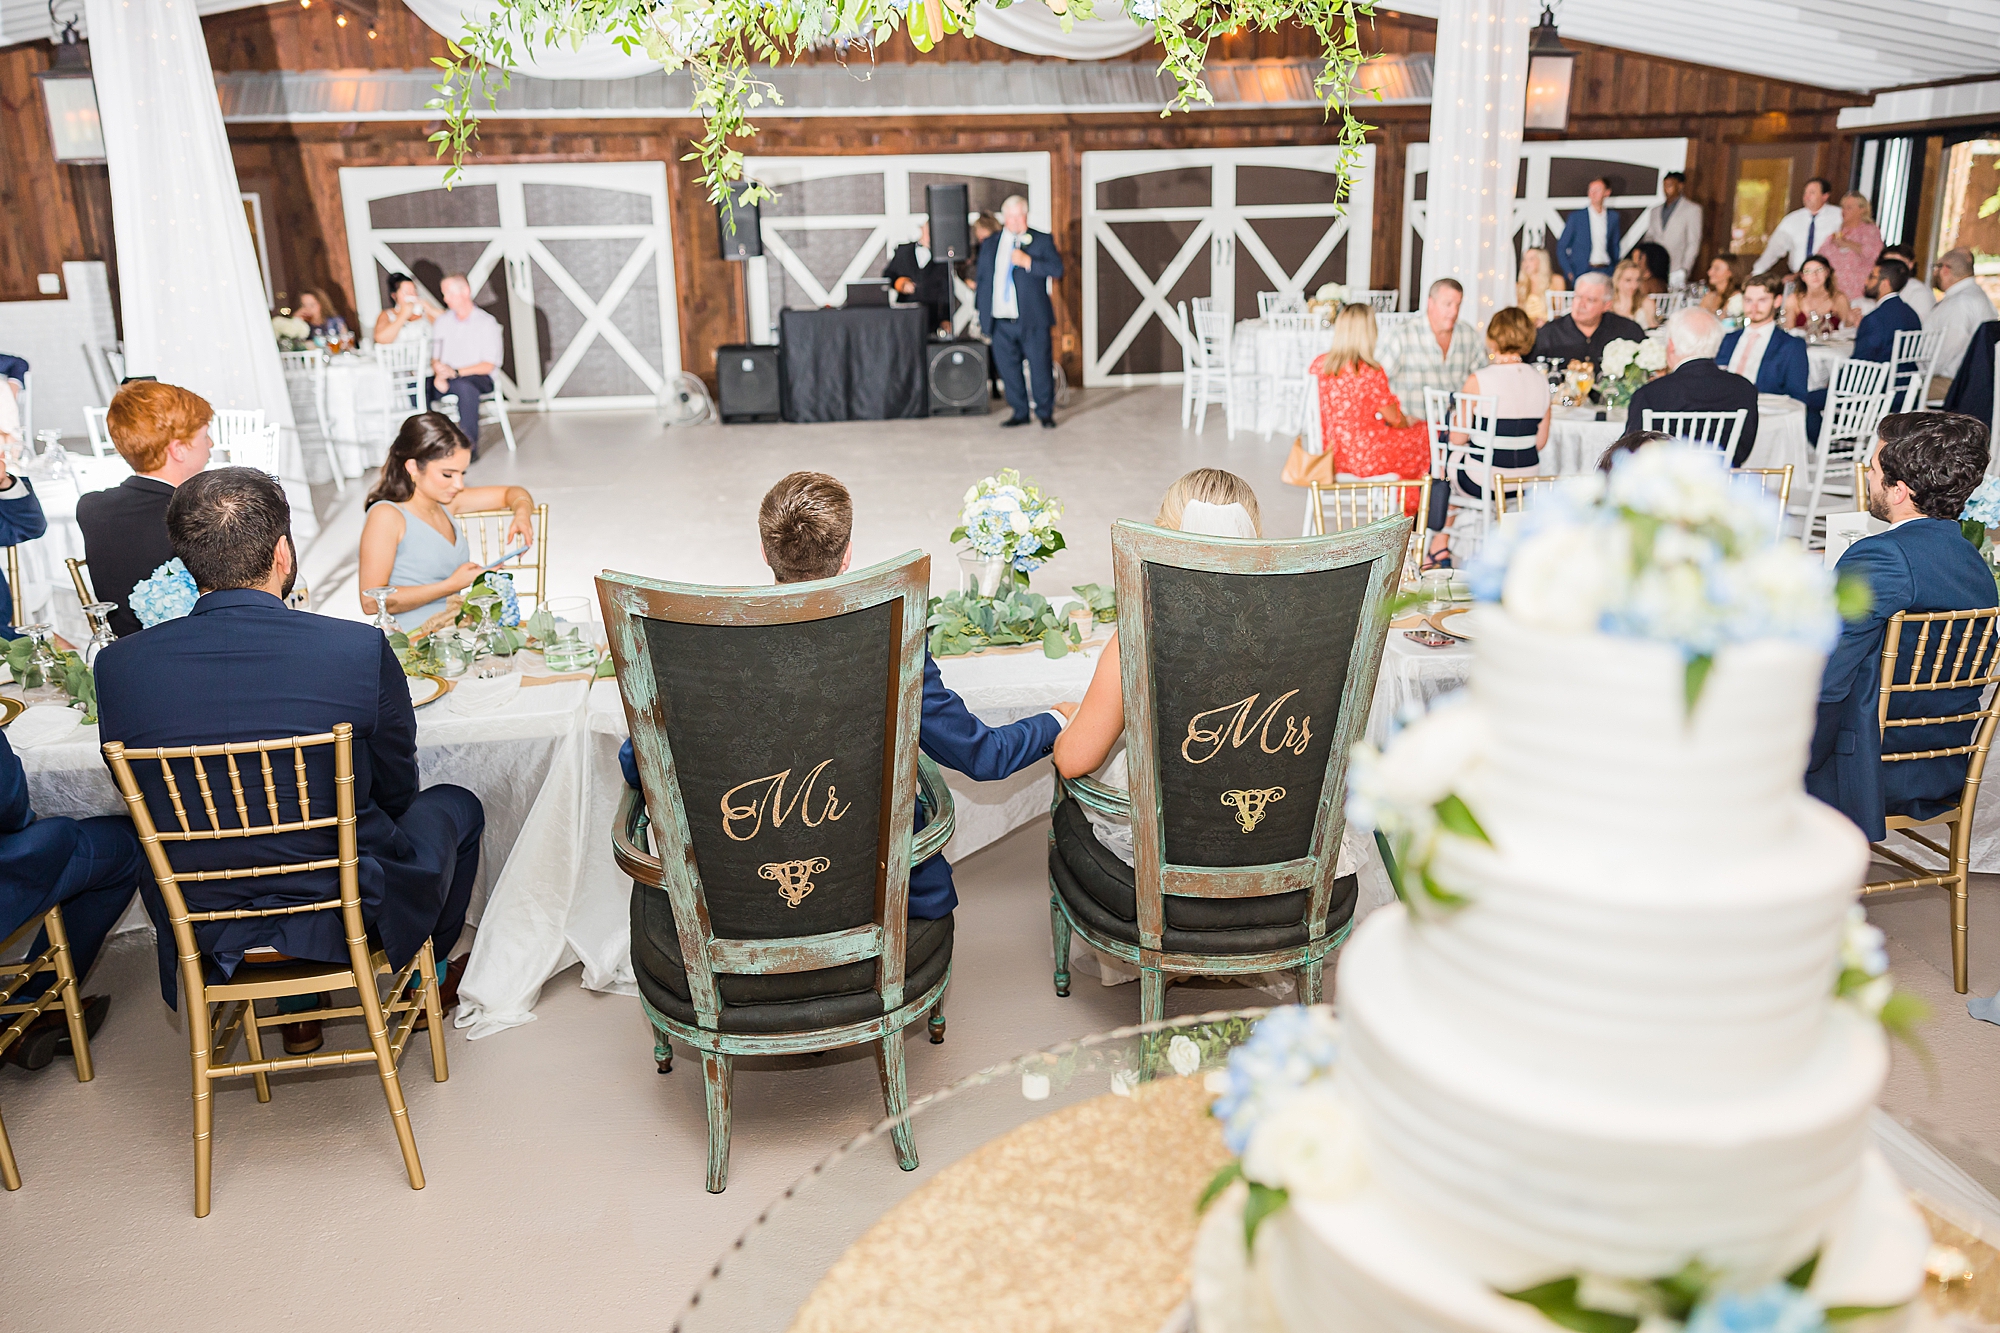 Vintage White Barn wedding reception with sweetheart table chairs